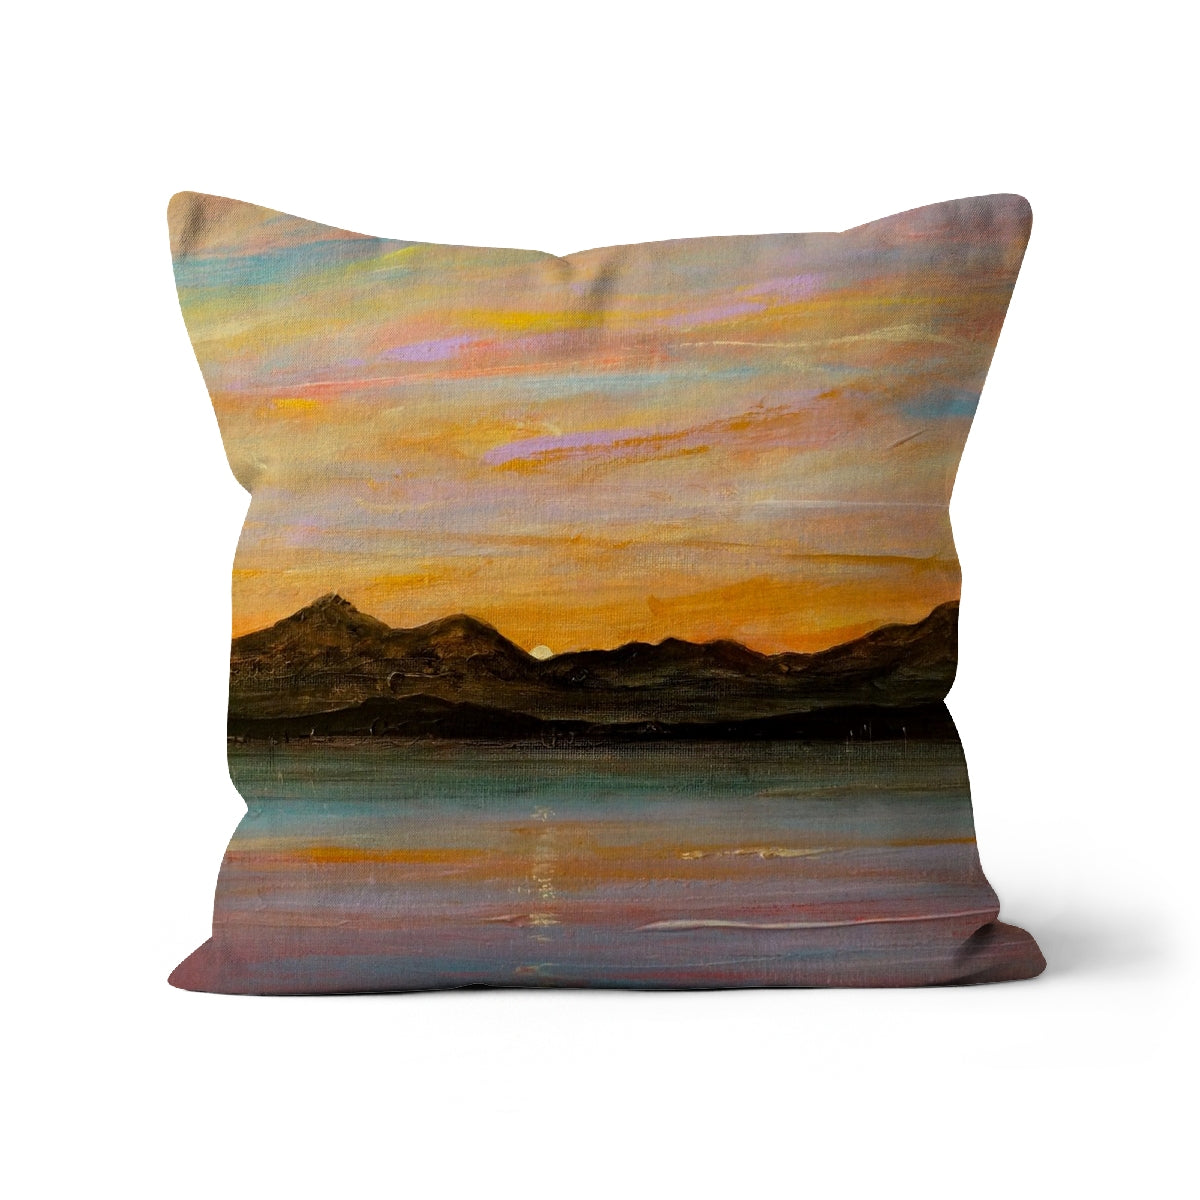 The Sleeping Warrior Arran Art Gifts Cushion-Cushions-Arran Art Gallery-Faux Suede-24"x24"-Paintings, Prints, Homeware, Art Gifts From Scotland By Scottish Artist Kevin Hunter